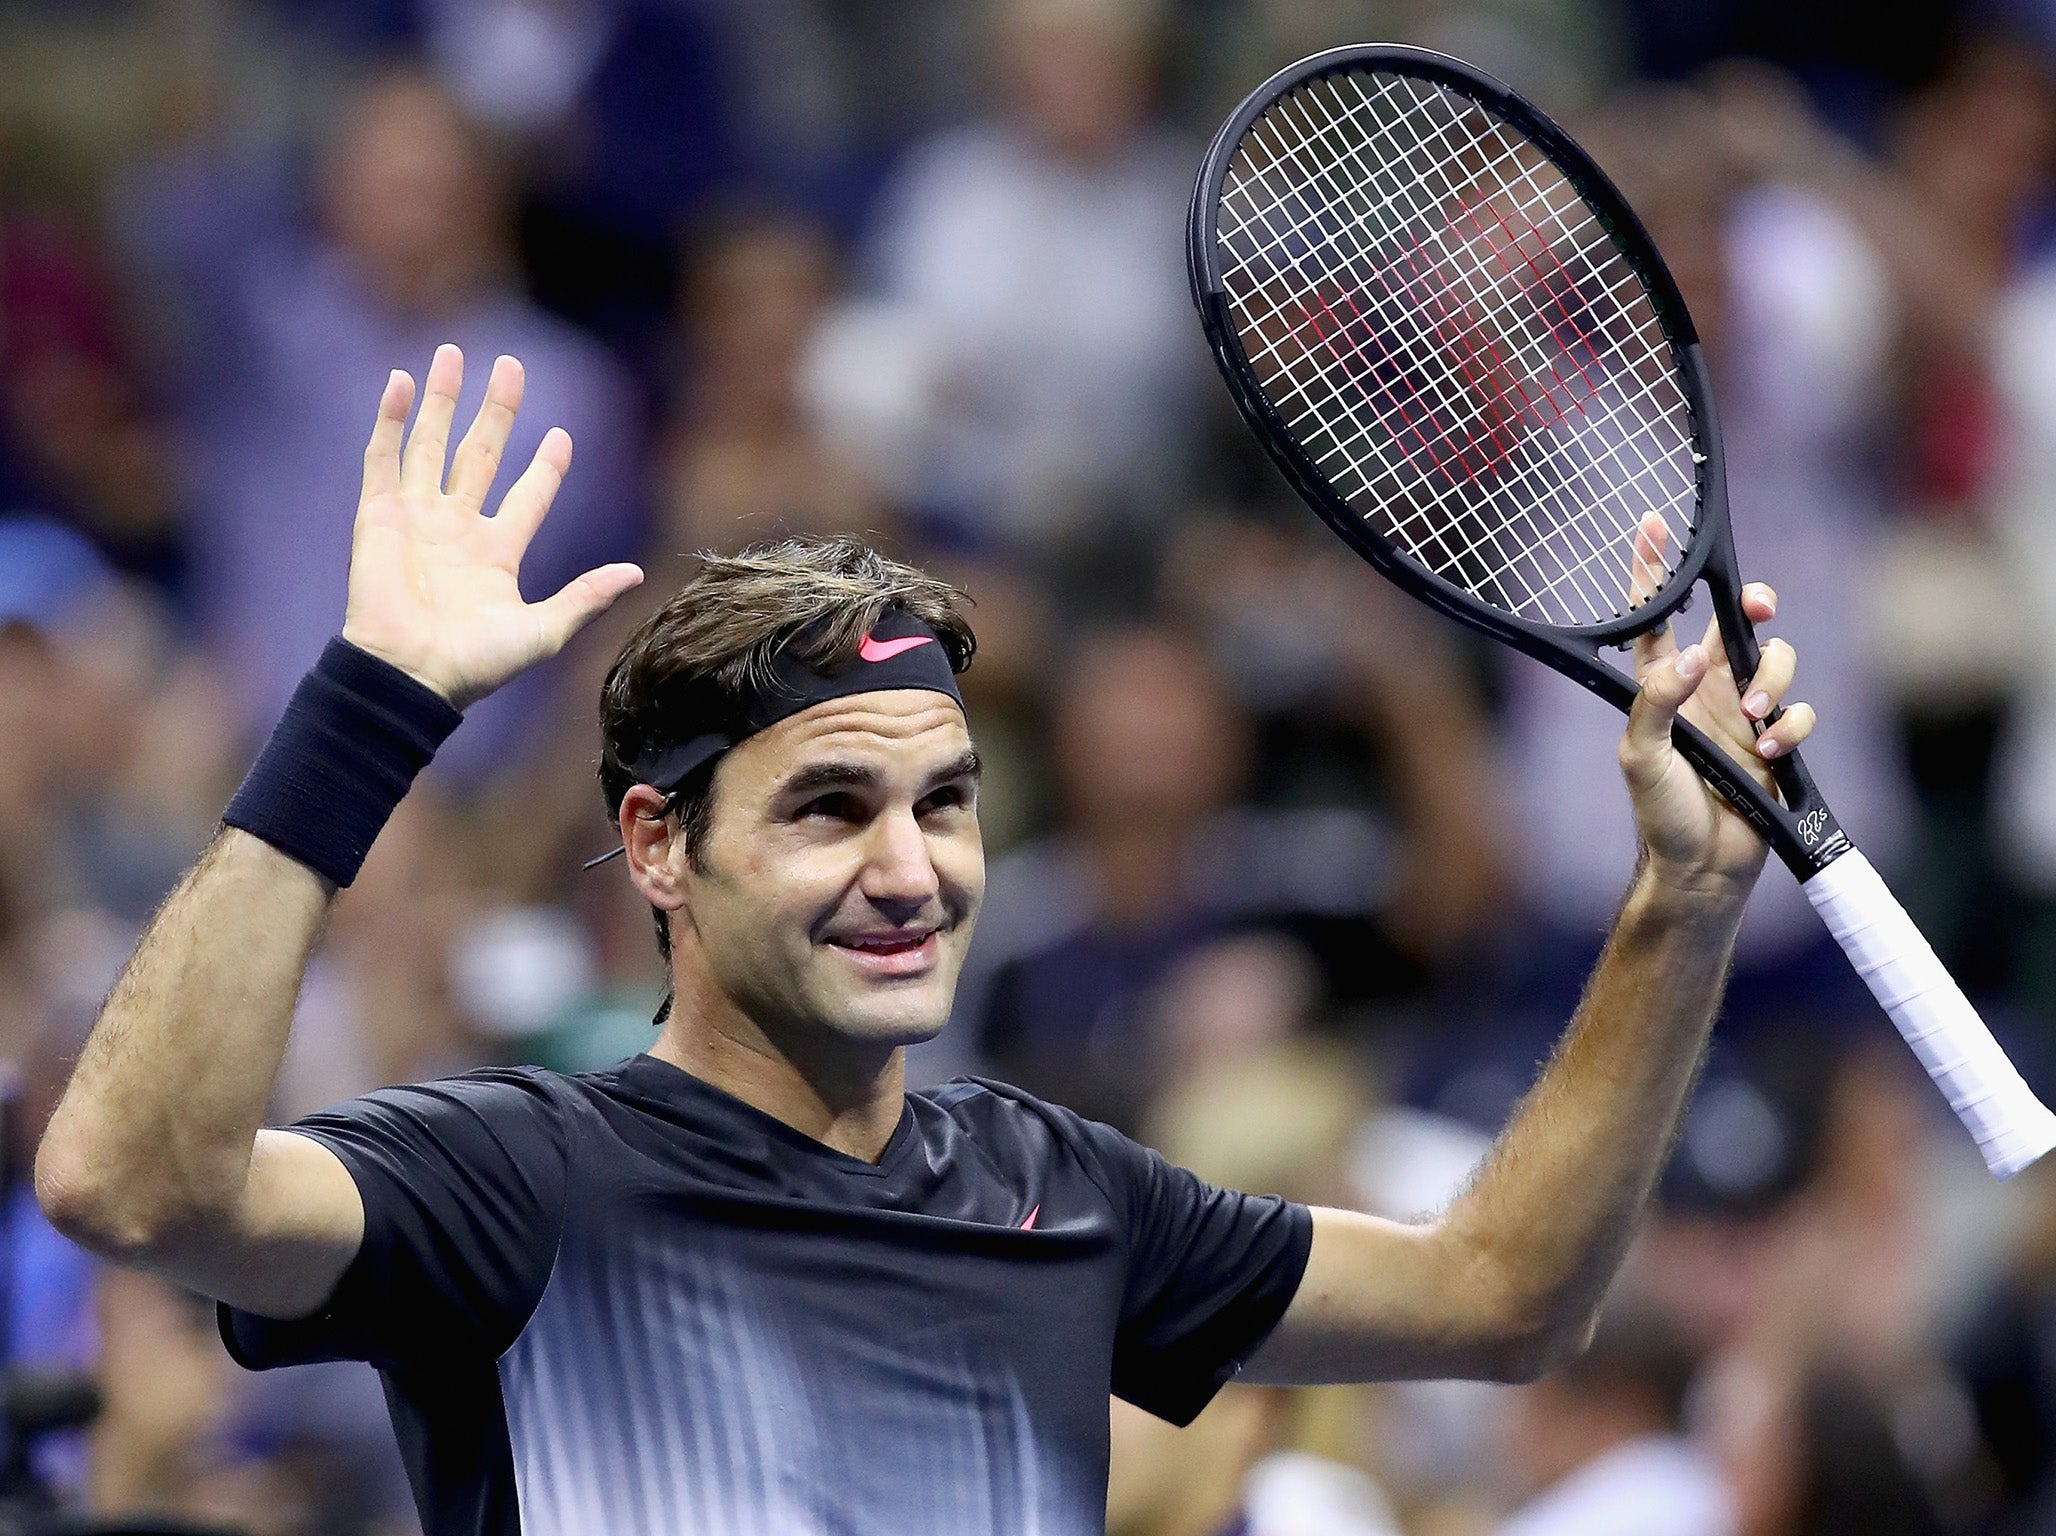 Federer only narrowly beat his younger opponent